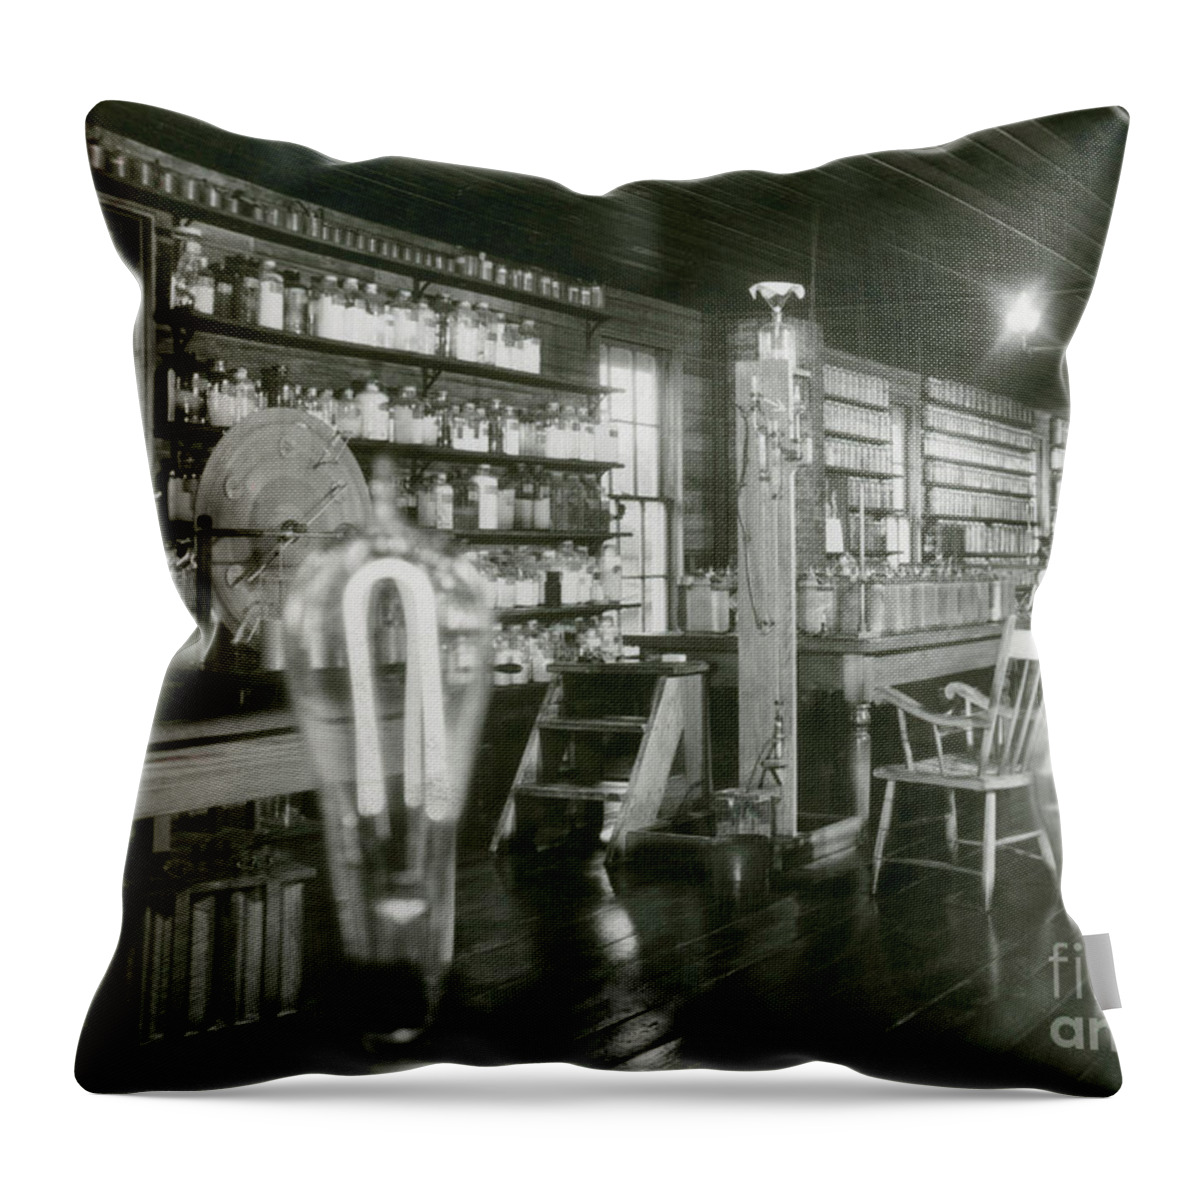 History Throw Pillow featuring the photograph Edisons Menlo Park Lab by Science Source